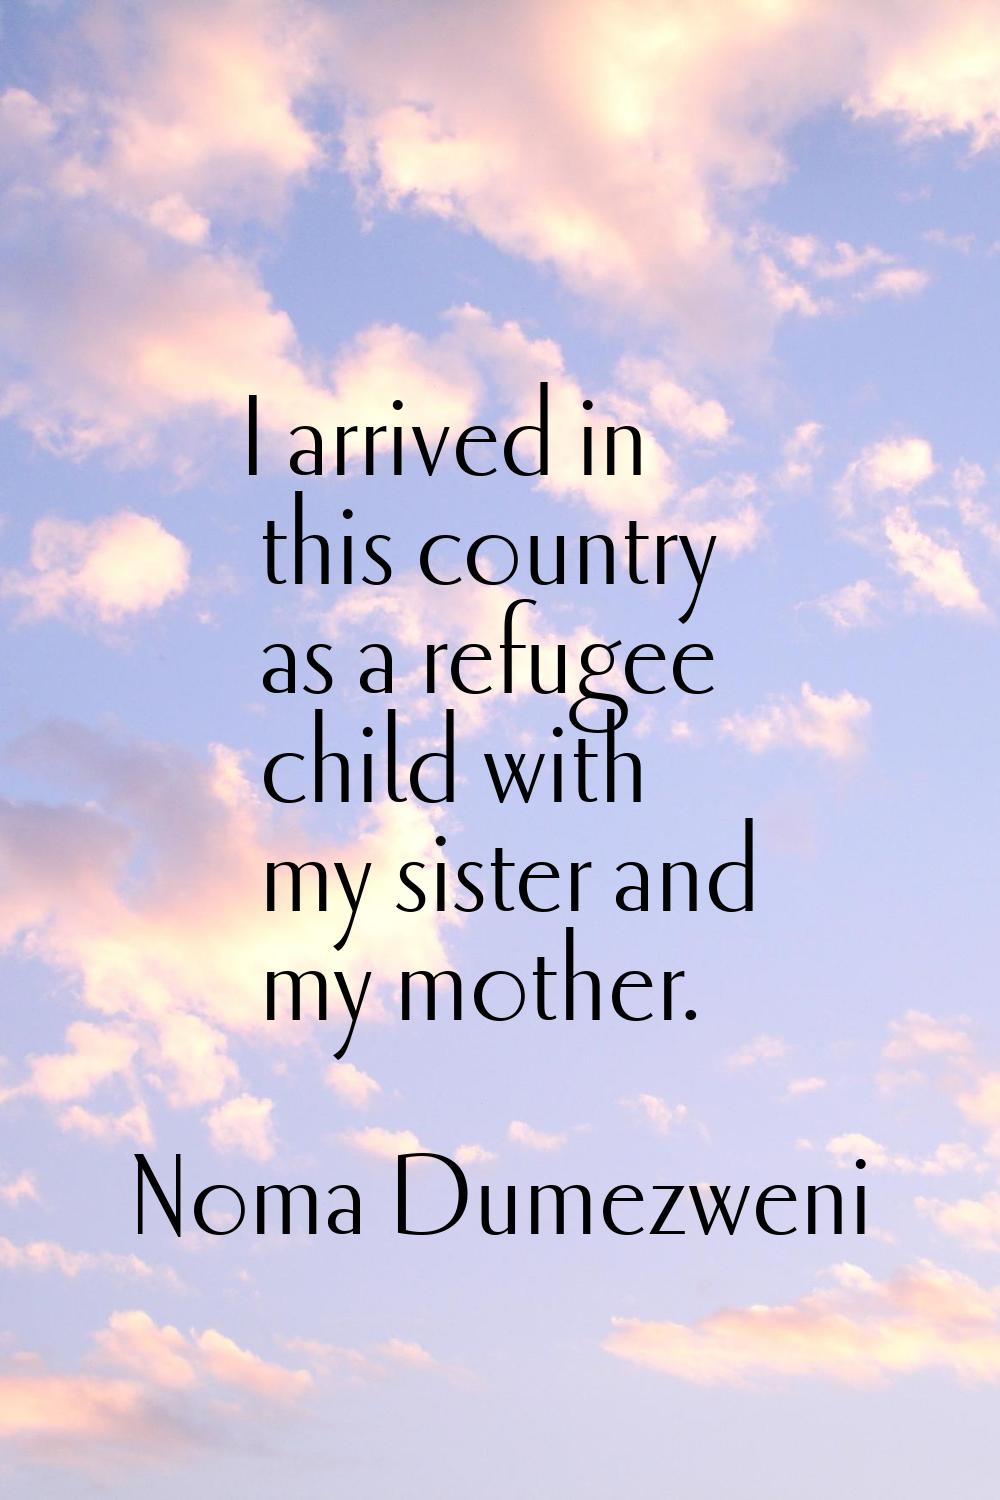 I arrived in this country as a refugee child with my sister and my mother.